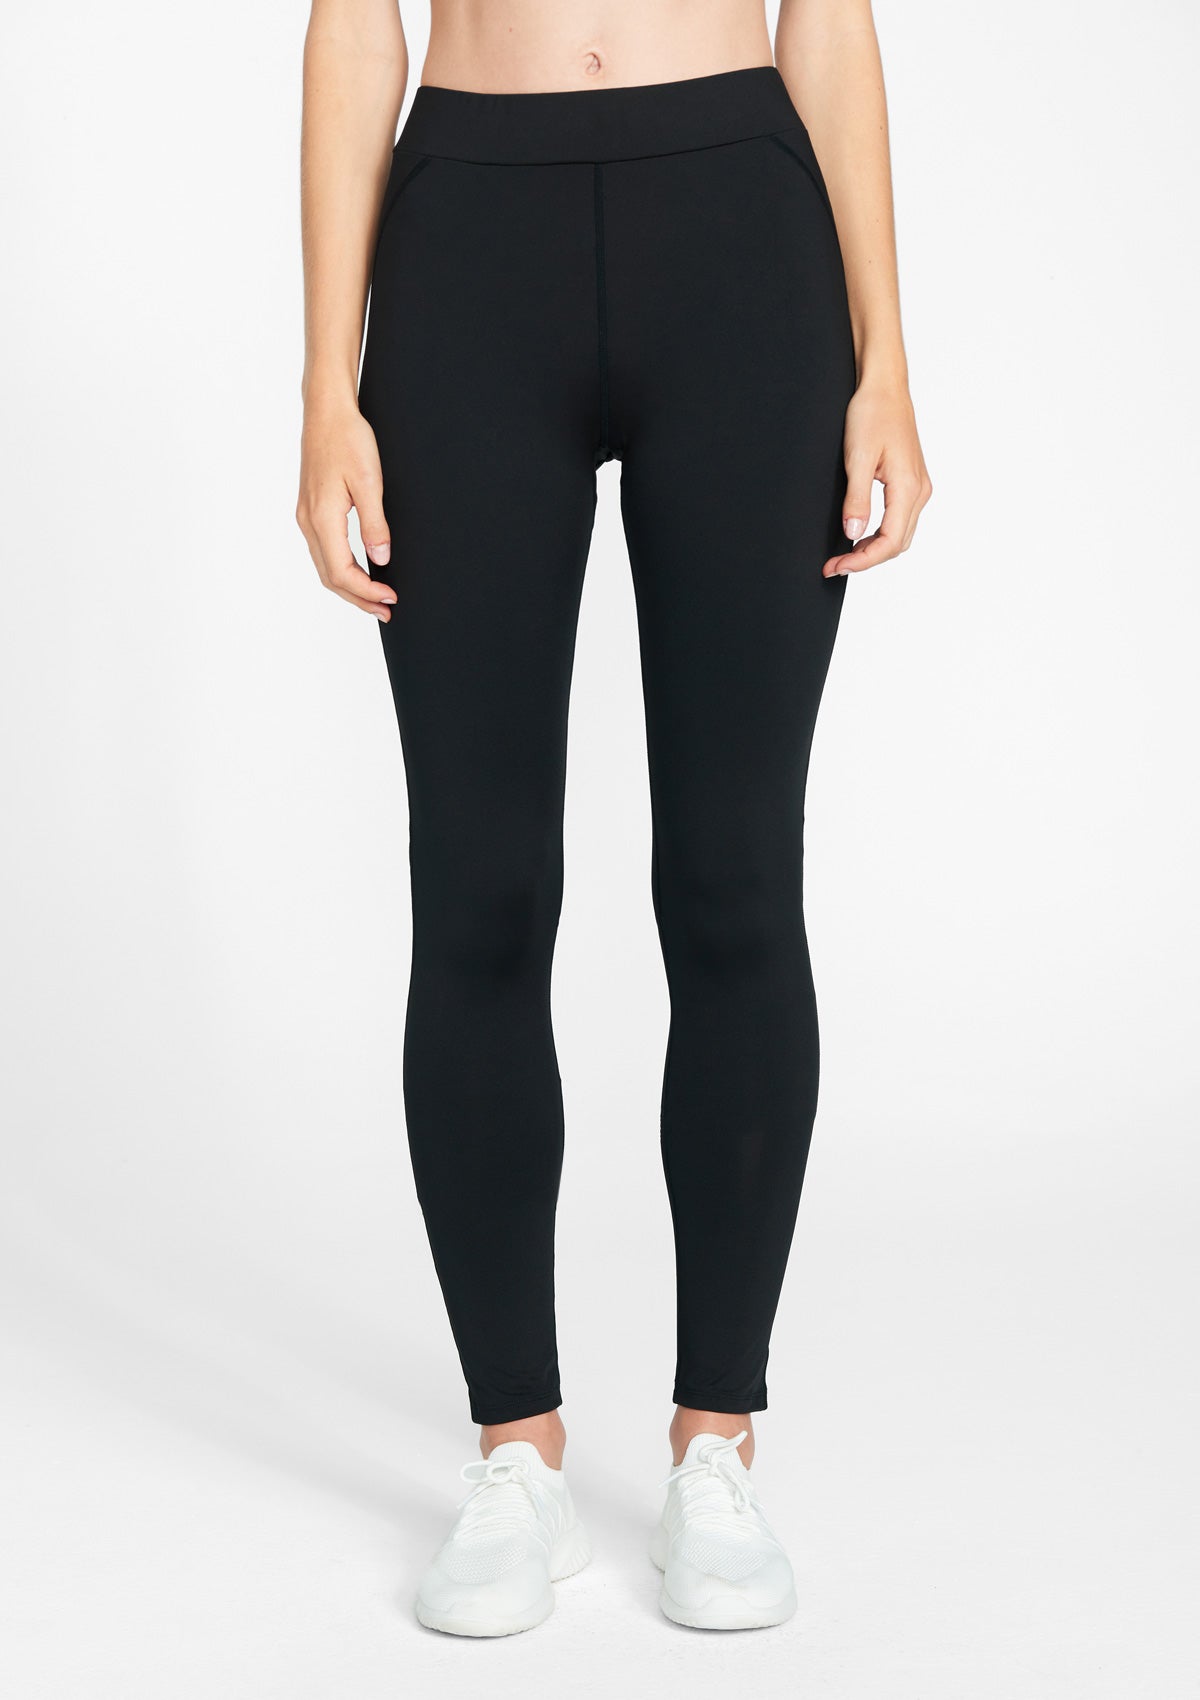 Alloy Apparel Tall Ashley Active Leggings for Women in Black Size